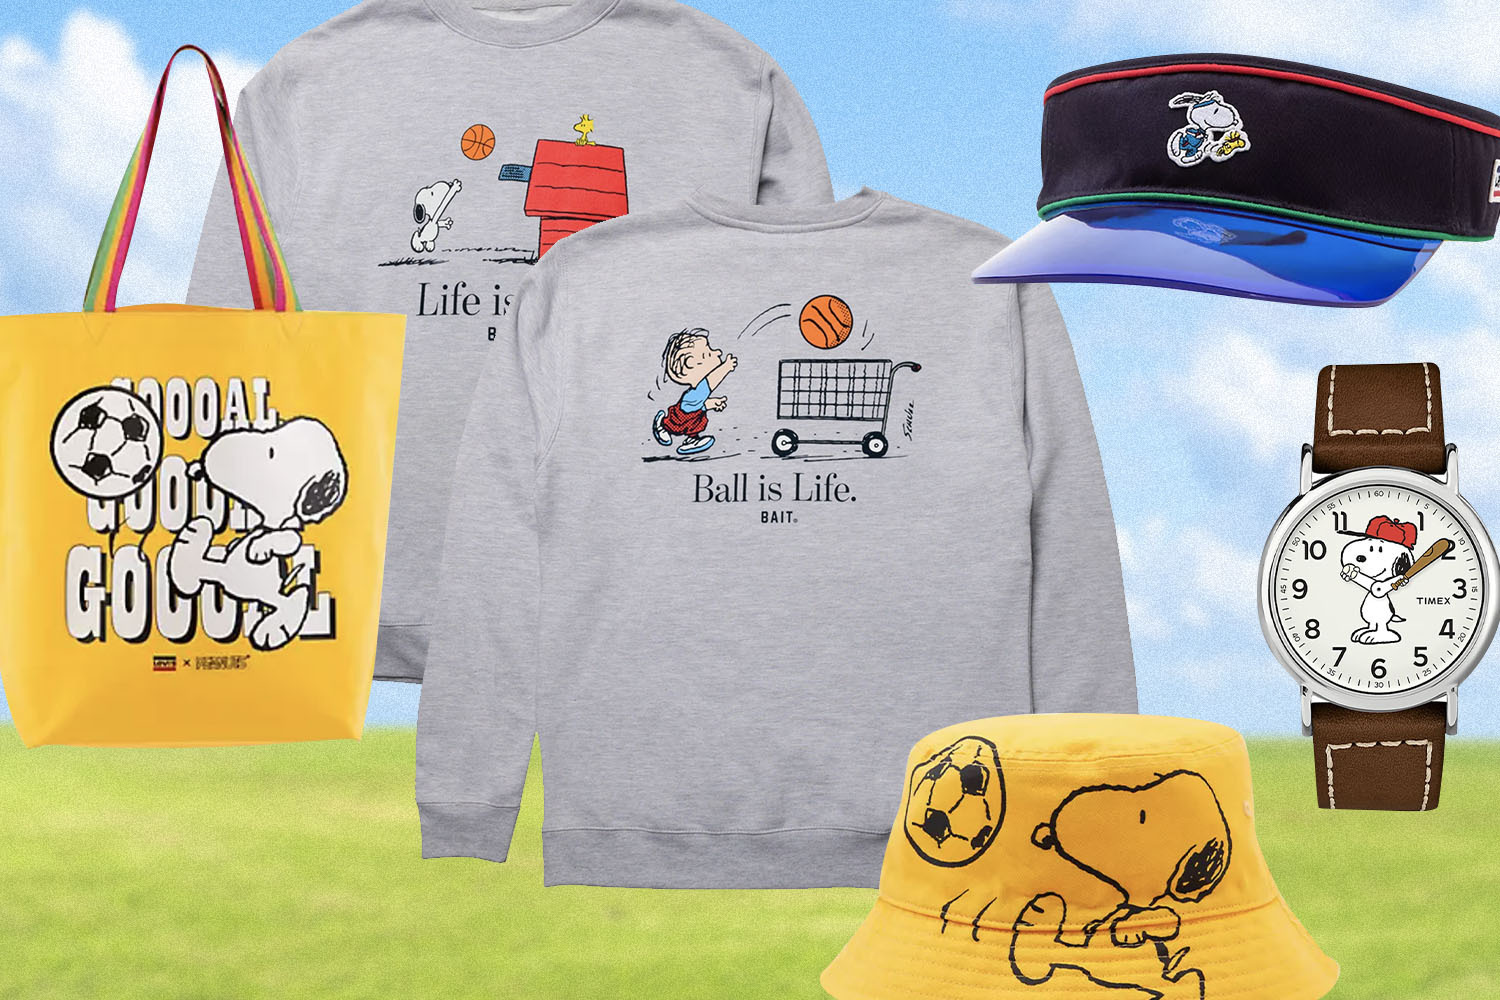 Snoopy and Peanuts clothing